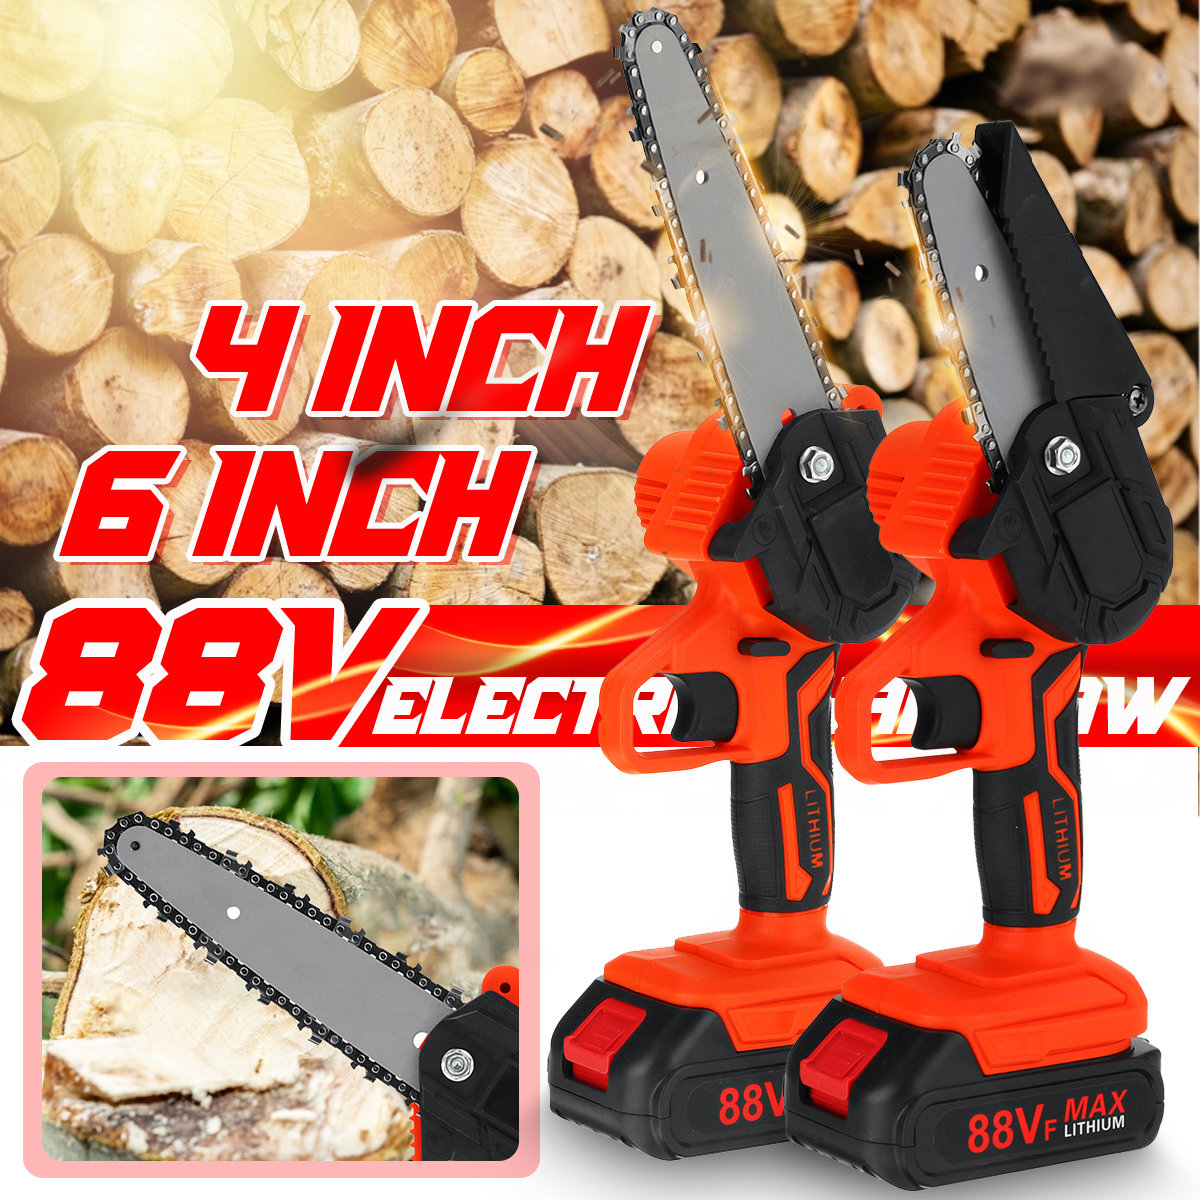 88VF-4Inch-6Inch-Cordless-Electric-Chain-Saw-One-Hand-Mini-Saw-Wood-Cutter-Woodworking-Tool-W-12-Bat-1870556-4